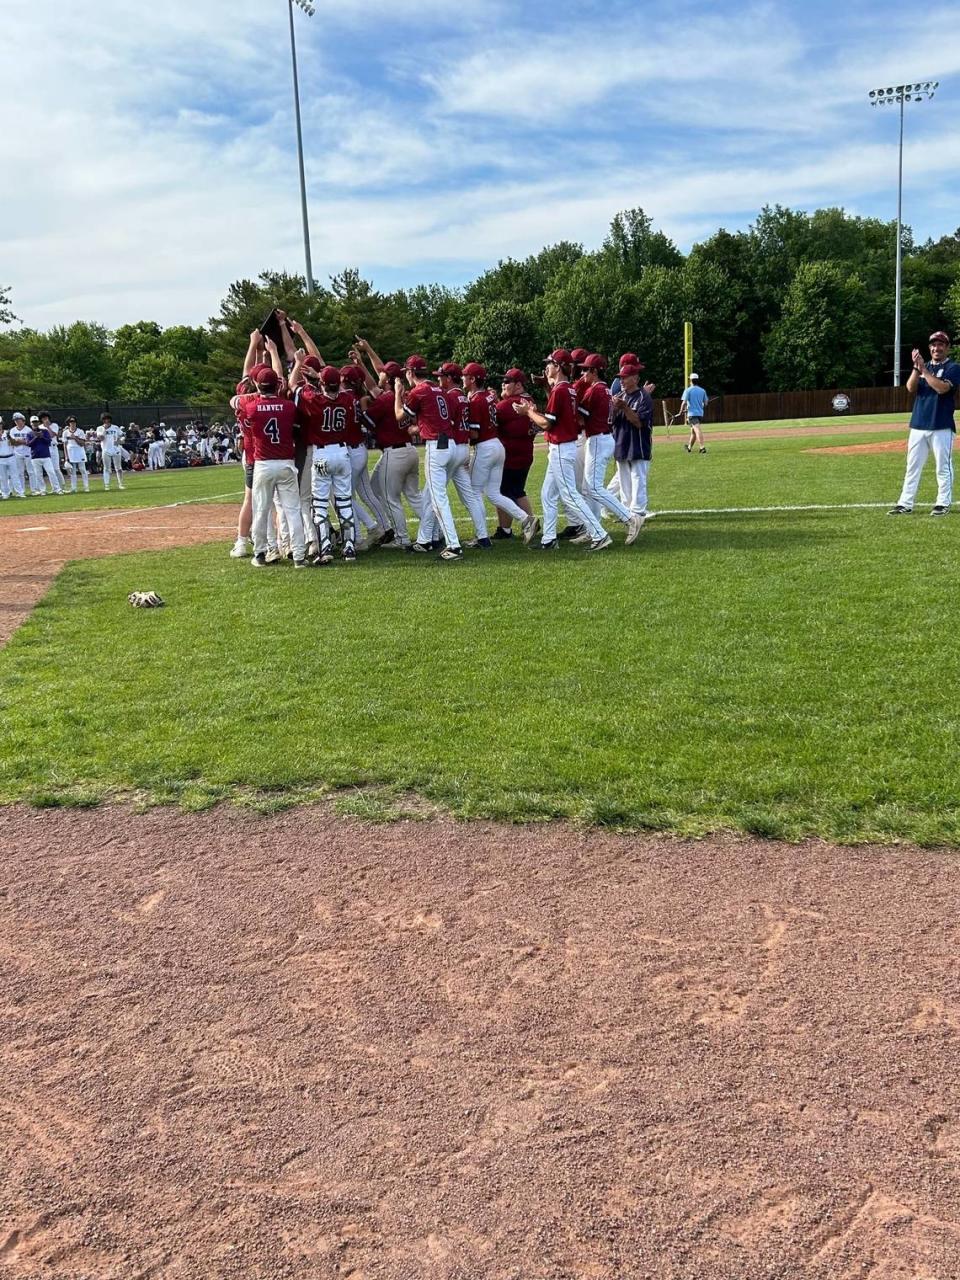 The Gibault baseball team celebrates after defeating Jacksonville Routt 7-3 in the Springfield Lincoln-Land Community College Super-Sectional on Monday, May 31, to advance to state. The Hawks (22-14) open play at state against Goreville at 10 a.m. Friday, June 2, at Dozer Park in Peoria.